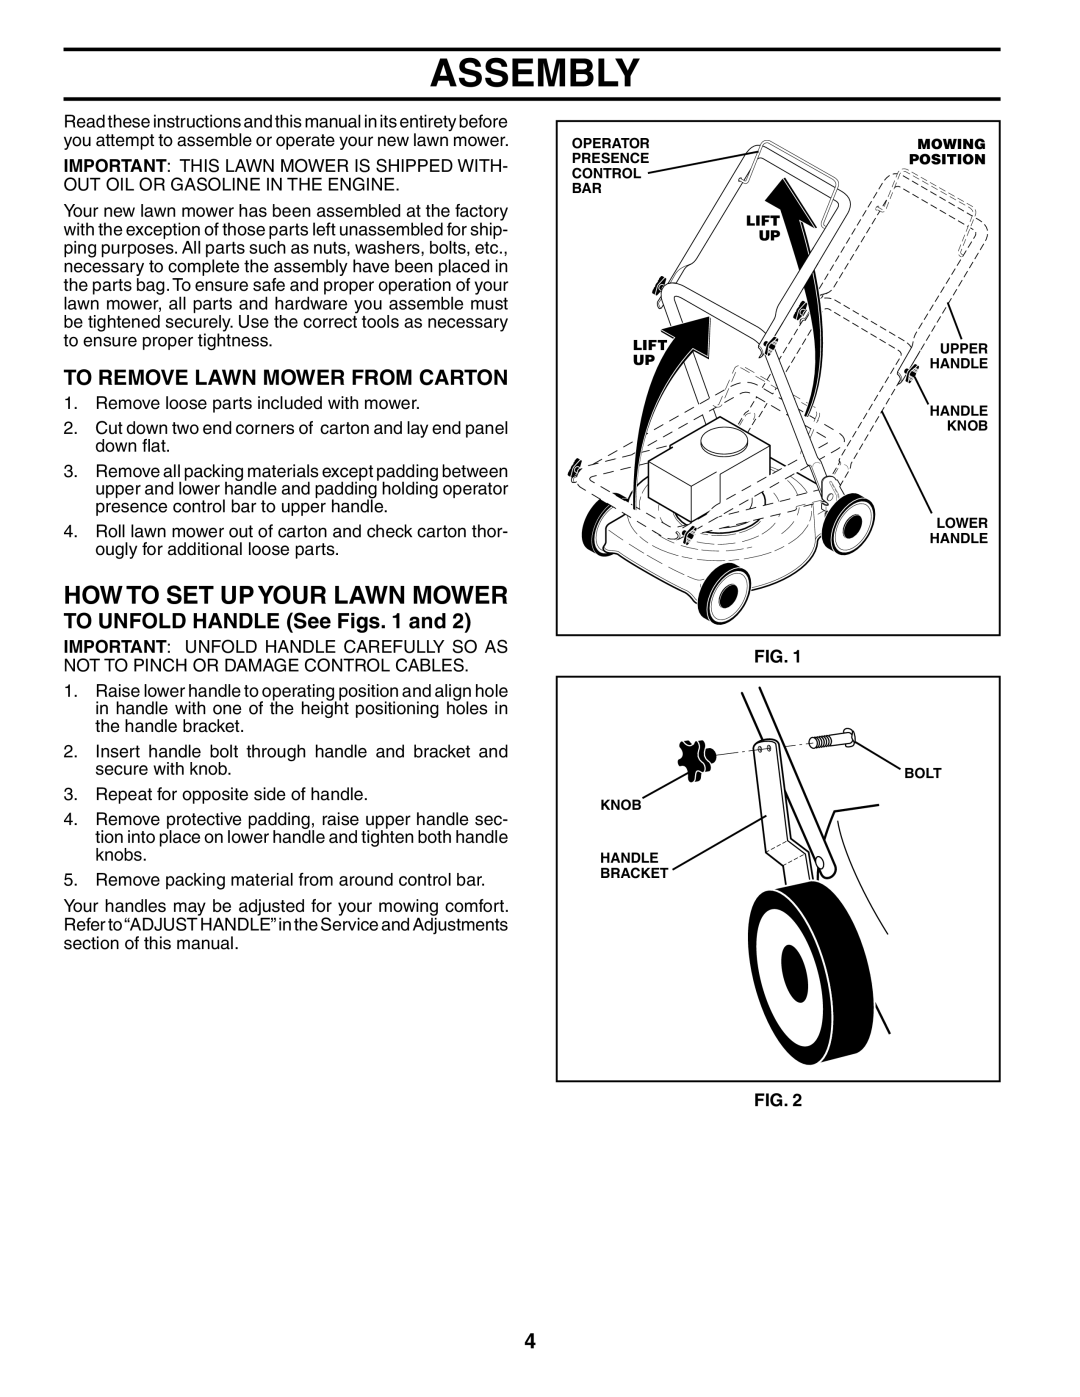 Husqvarna 55R21HVL owner manual Assembly, How To Set Up Your Lawn Mower, To Remove Lawn Mower From Carton 